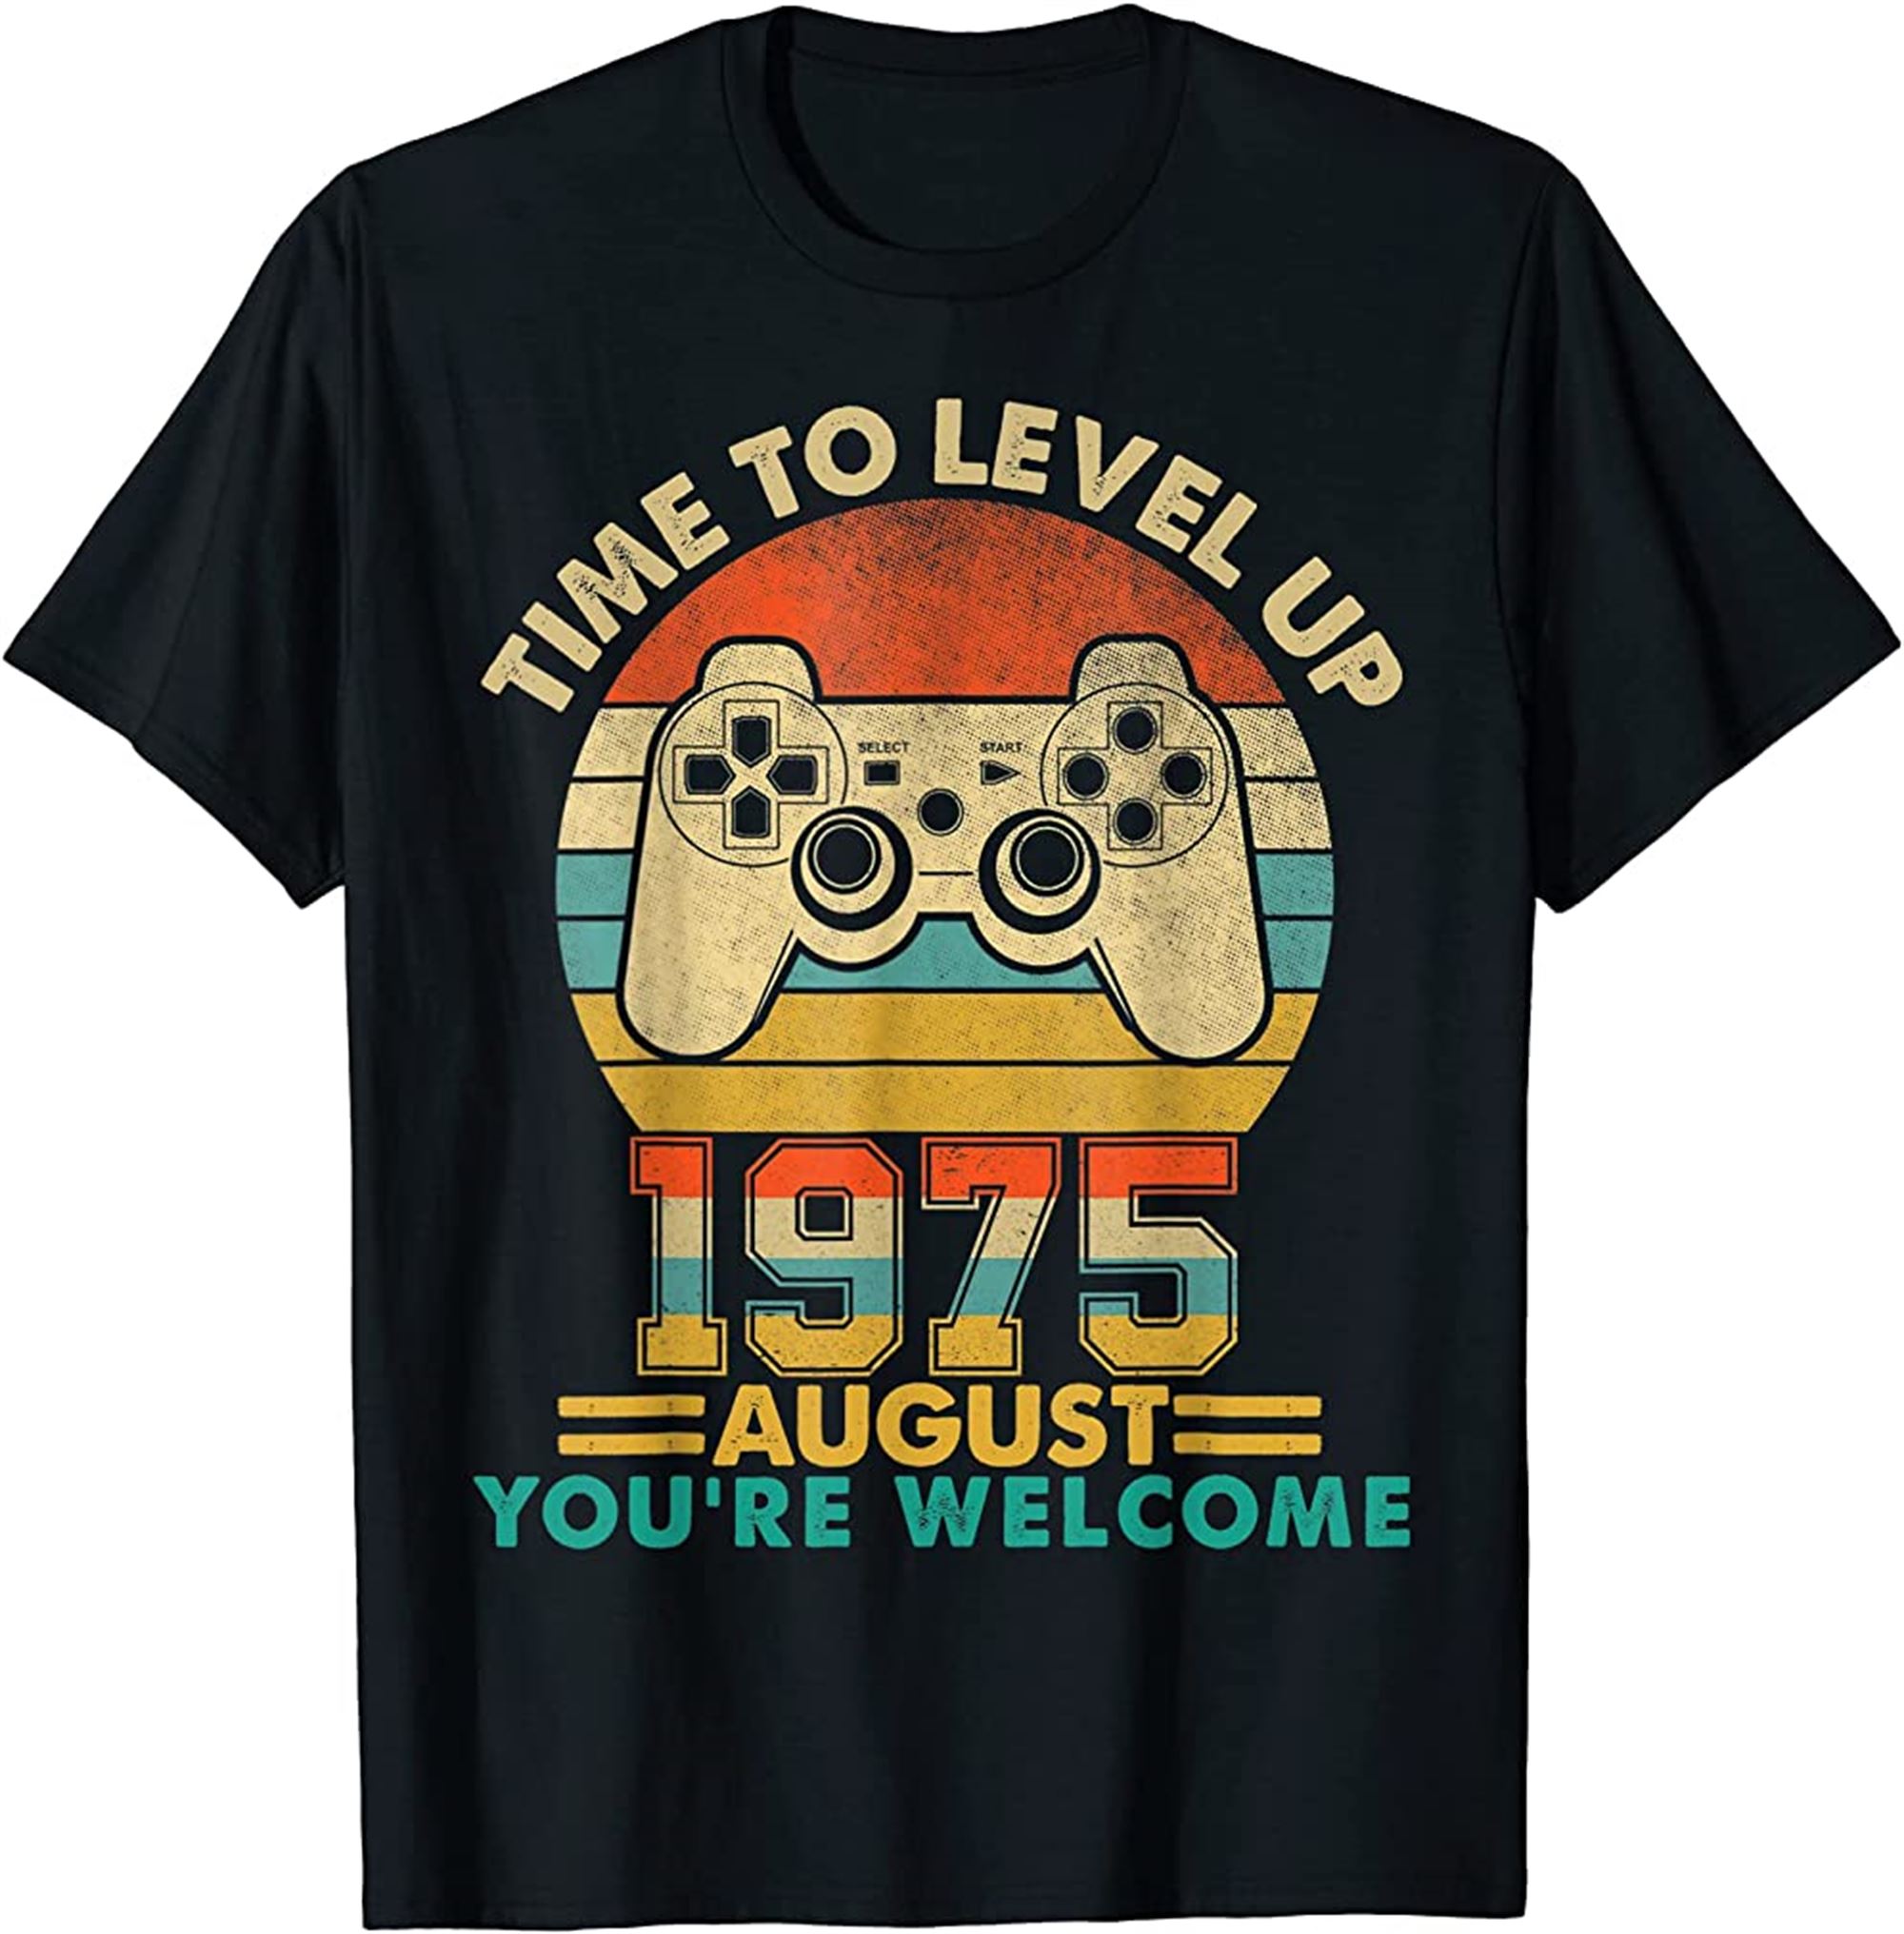 Vintage 1975 August 47 Years Old Video Gamer 47th Birthday T-shirt Plus Size Up To 5xl